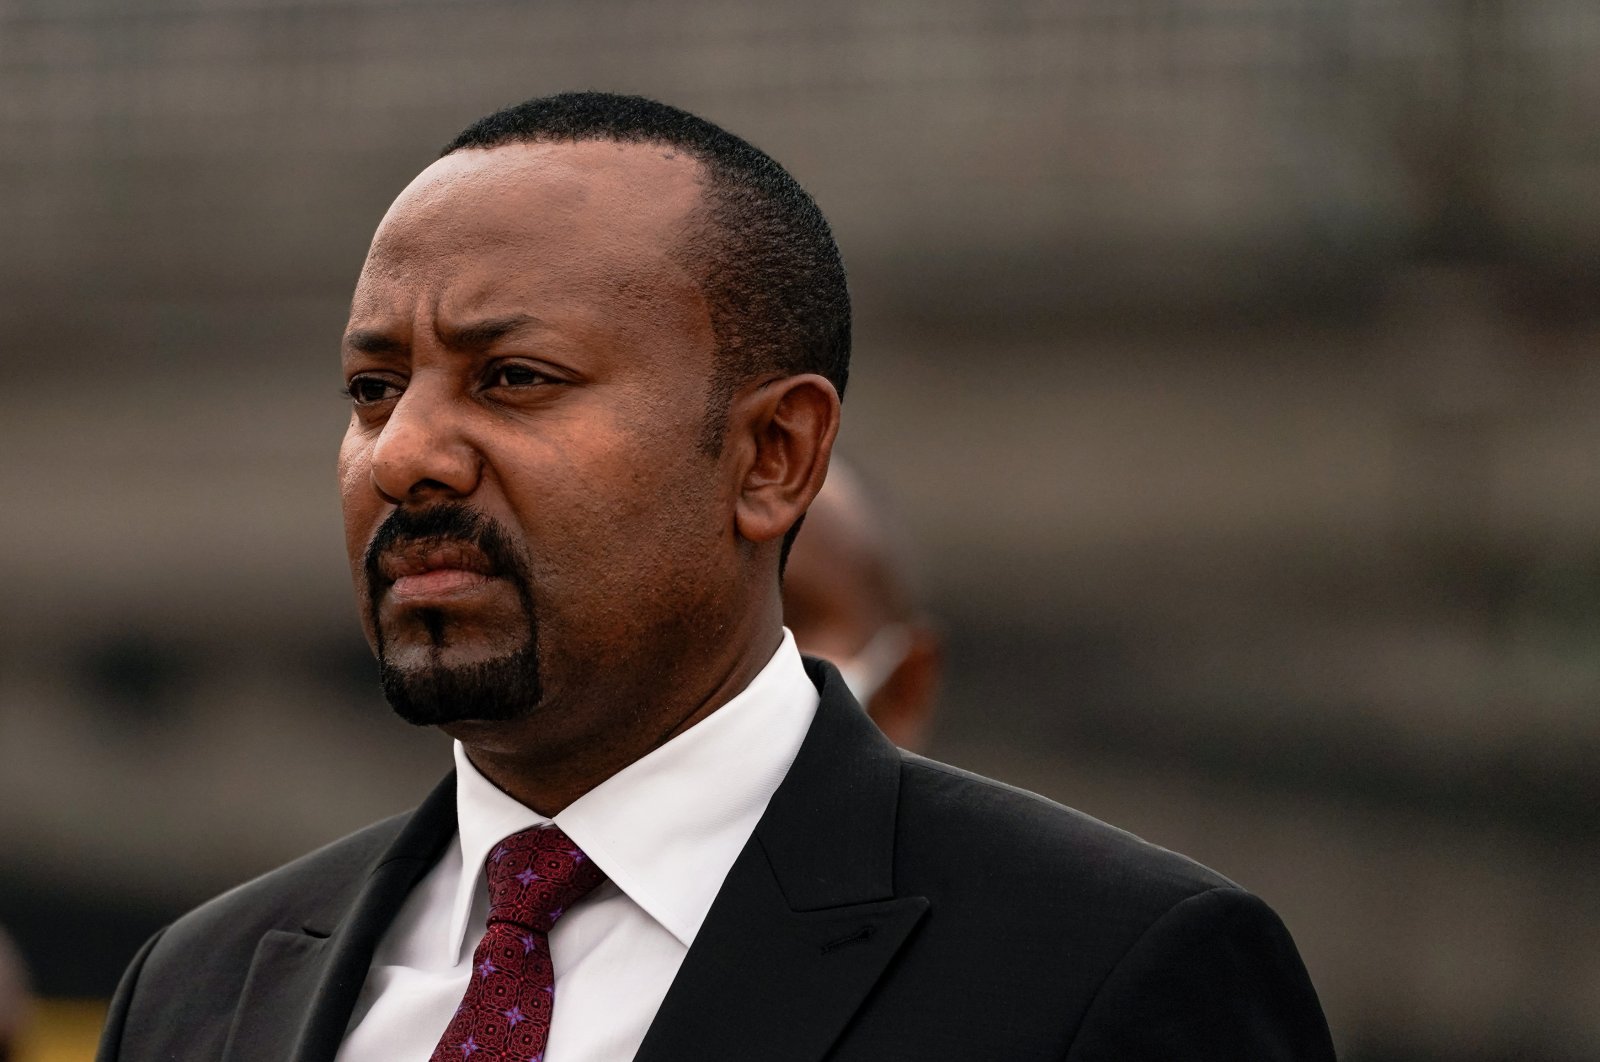 Ethiopian Prime Minister Abiy Ahmed attends the inauguration of the newly remodeled Meskel Square on June 13, 2021 in Addis Ababa, Ethiopia. (Getty Images)